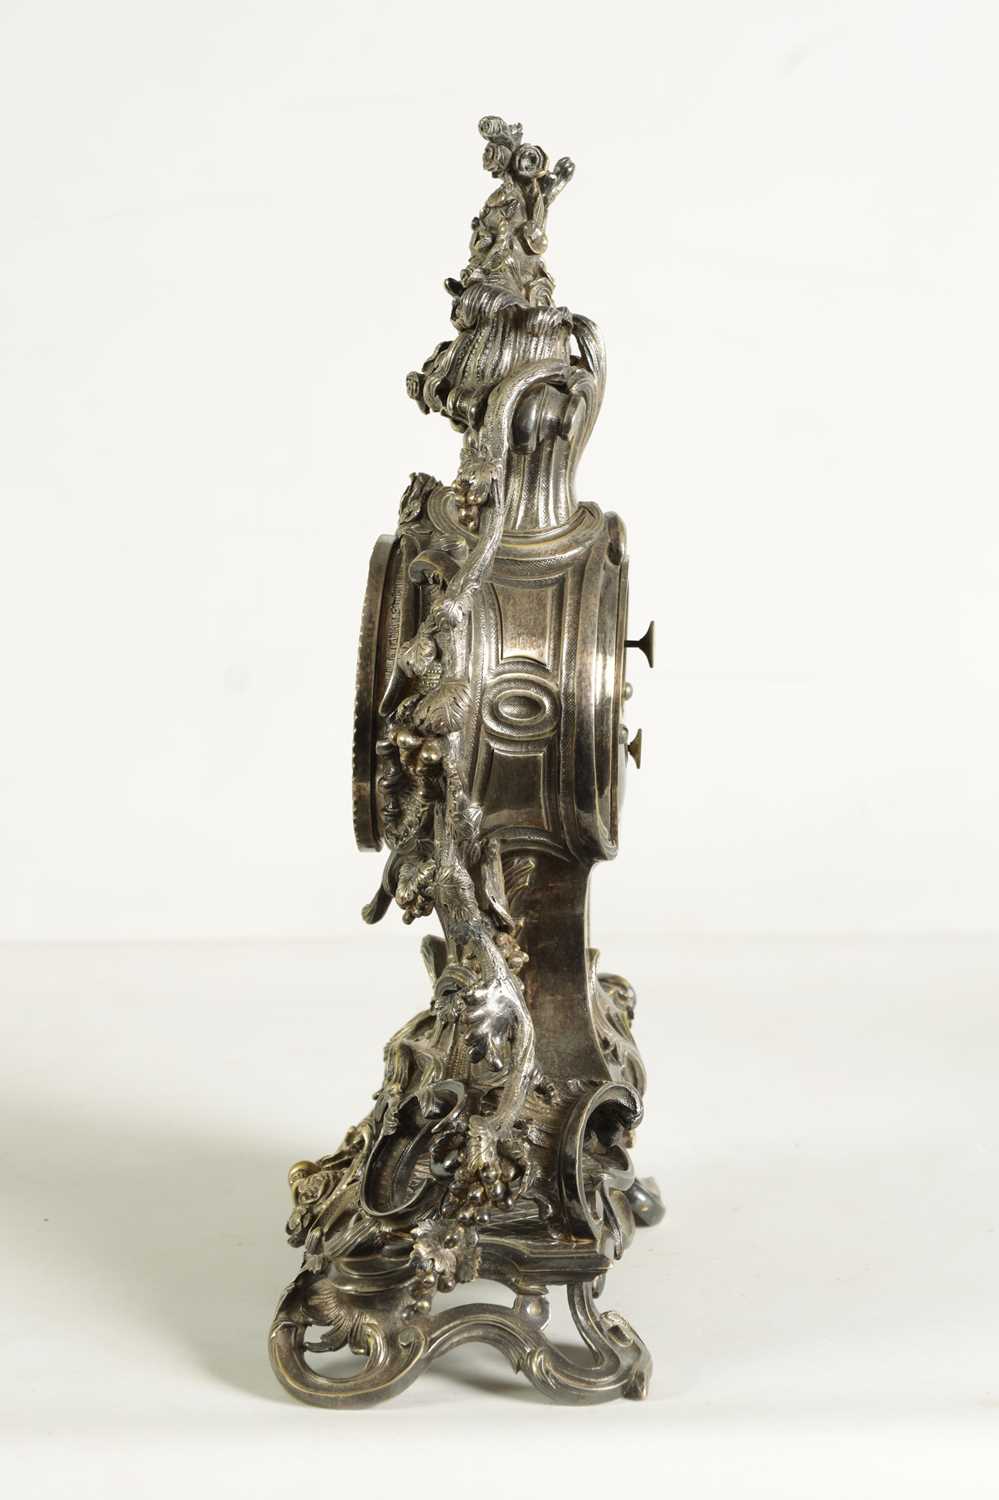 HENRY MARC, A PARIS. A MID 19TH CENTURY FRENCH ROCOCO STYLE SILVERED BRONZE MANTEL CLOCK - Image 7 of 10